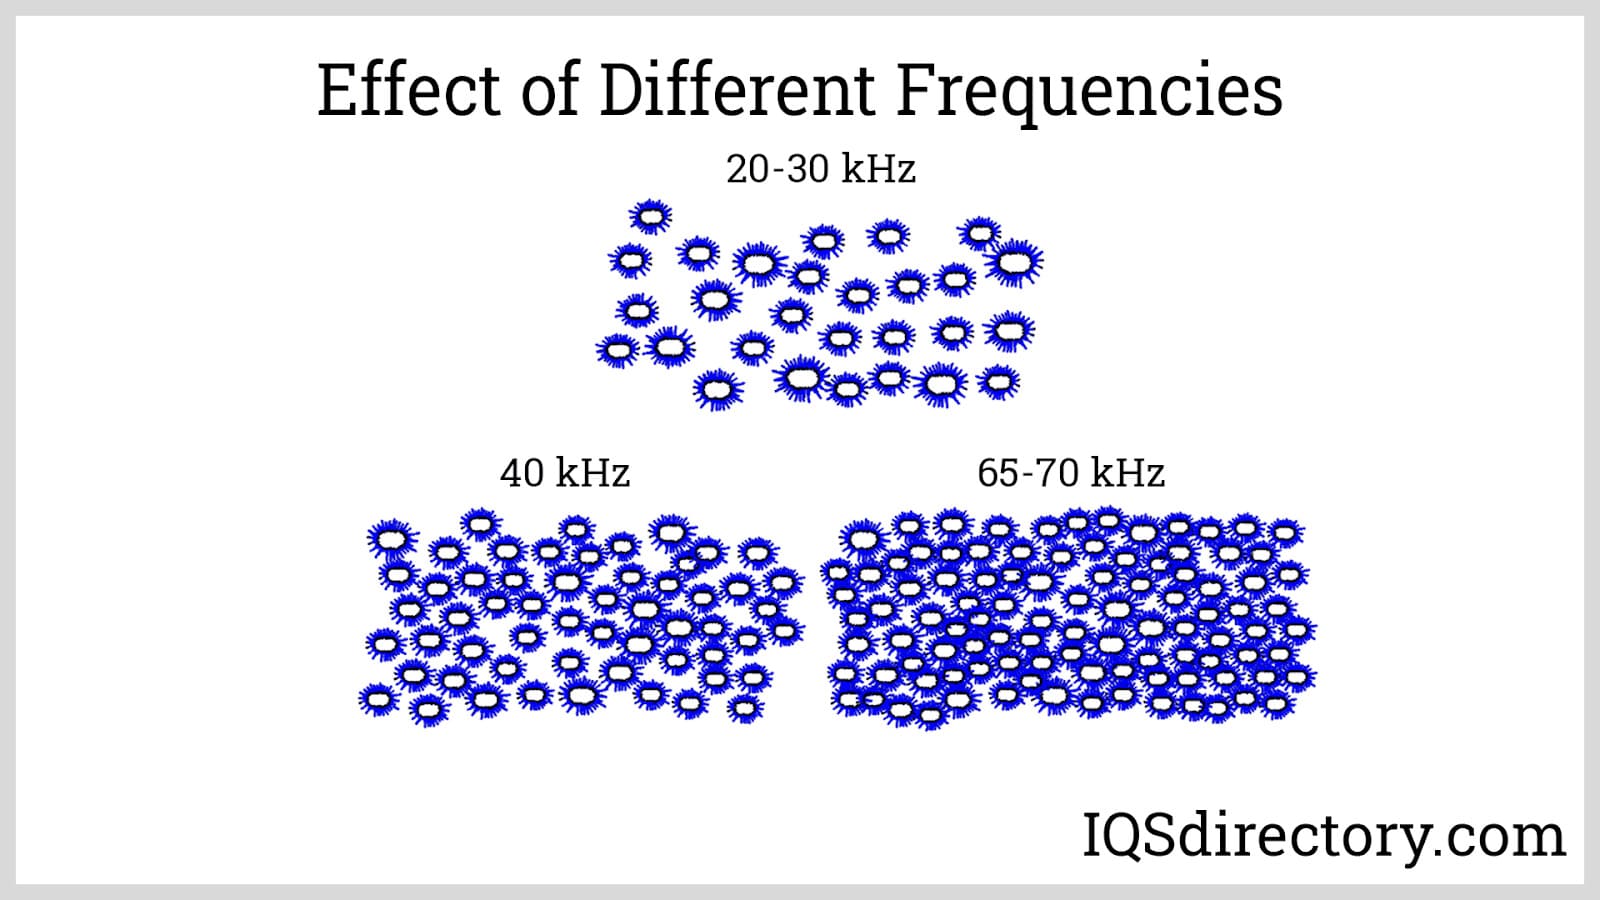 Effects of Different Frequencies